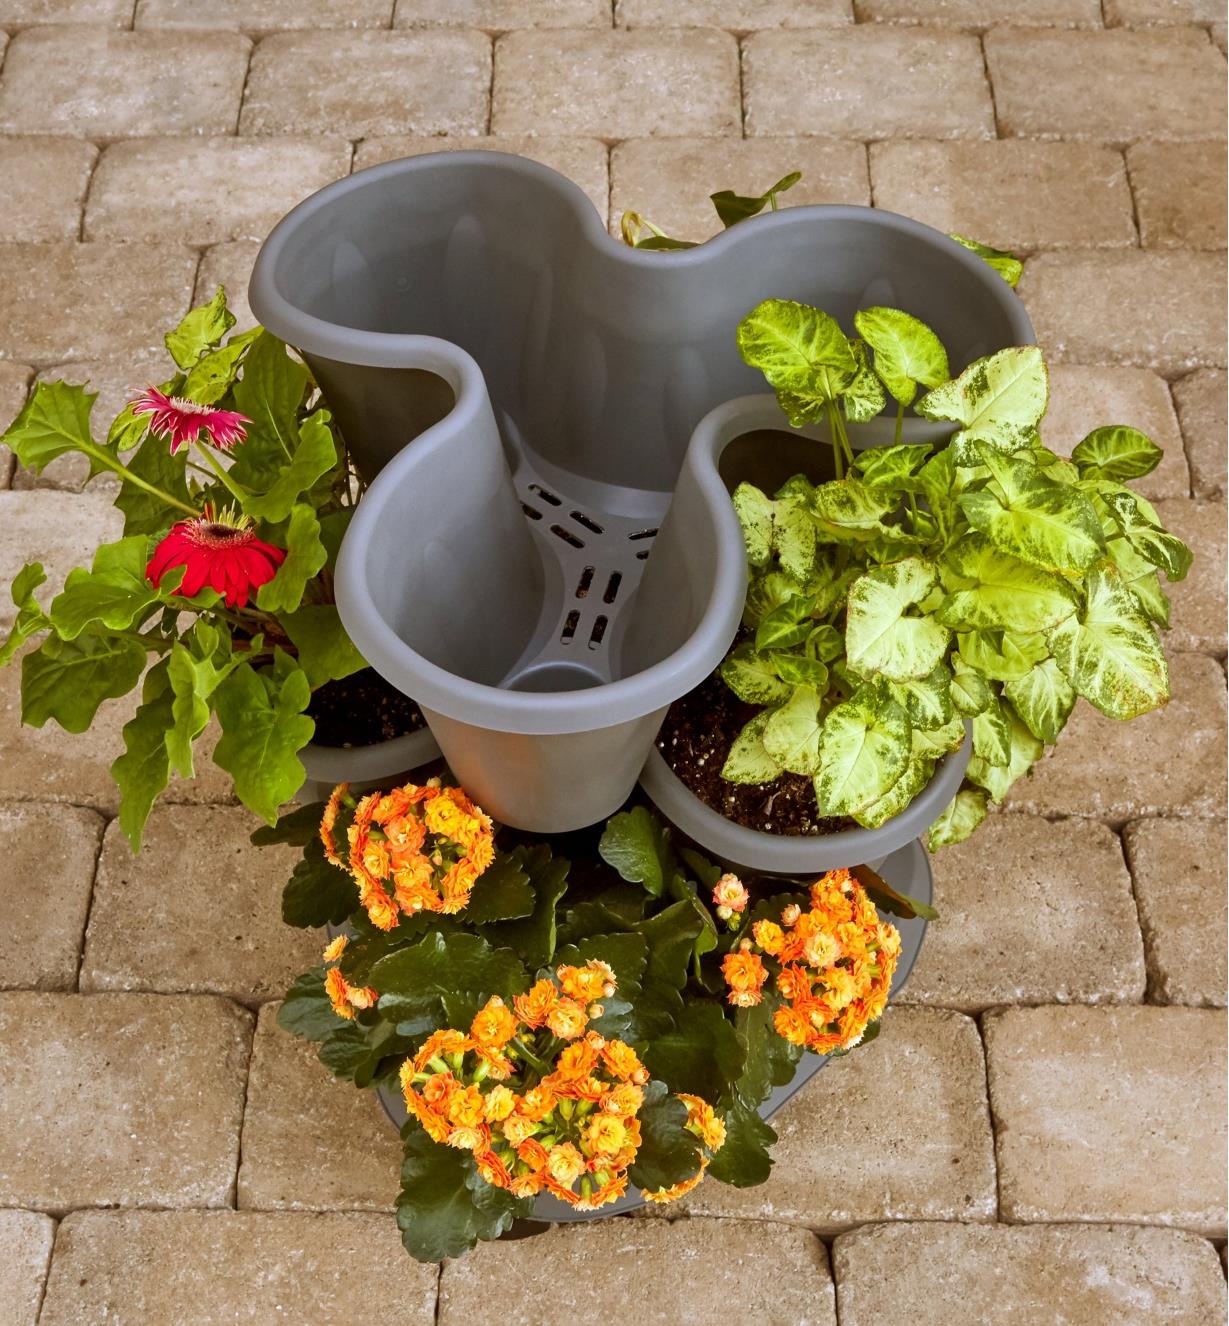 A triple planter with plants in the bottom two levels and the top level empty to show drainage ports